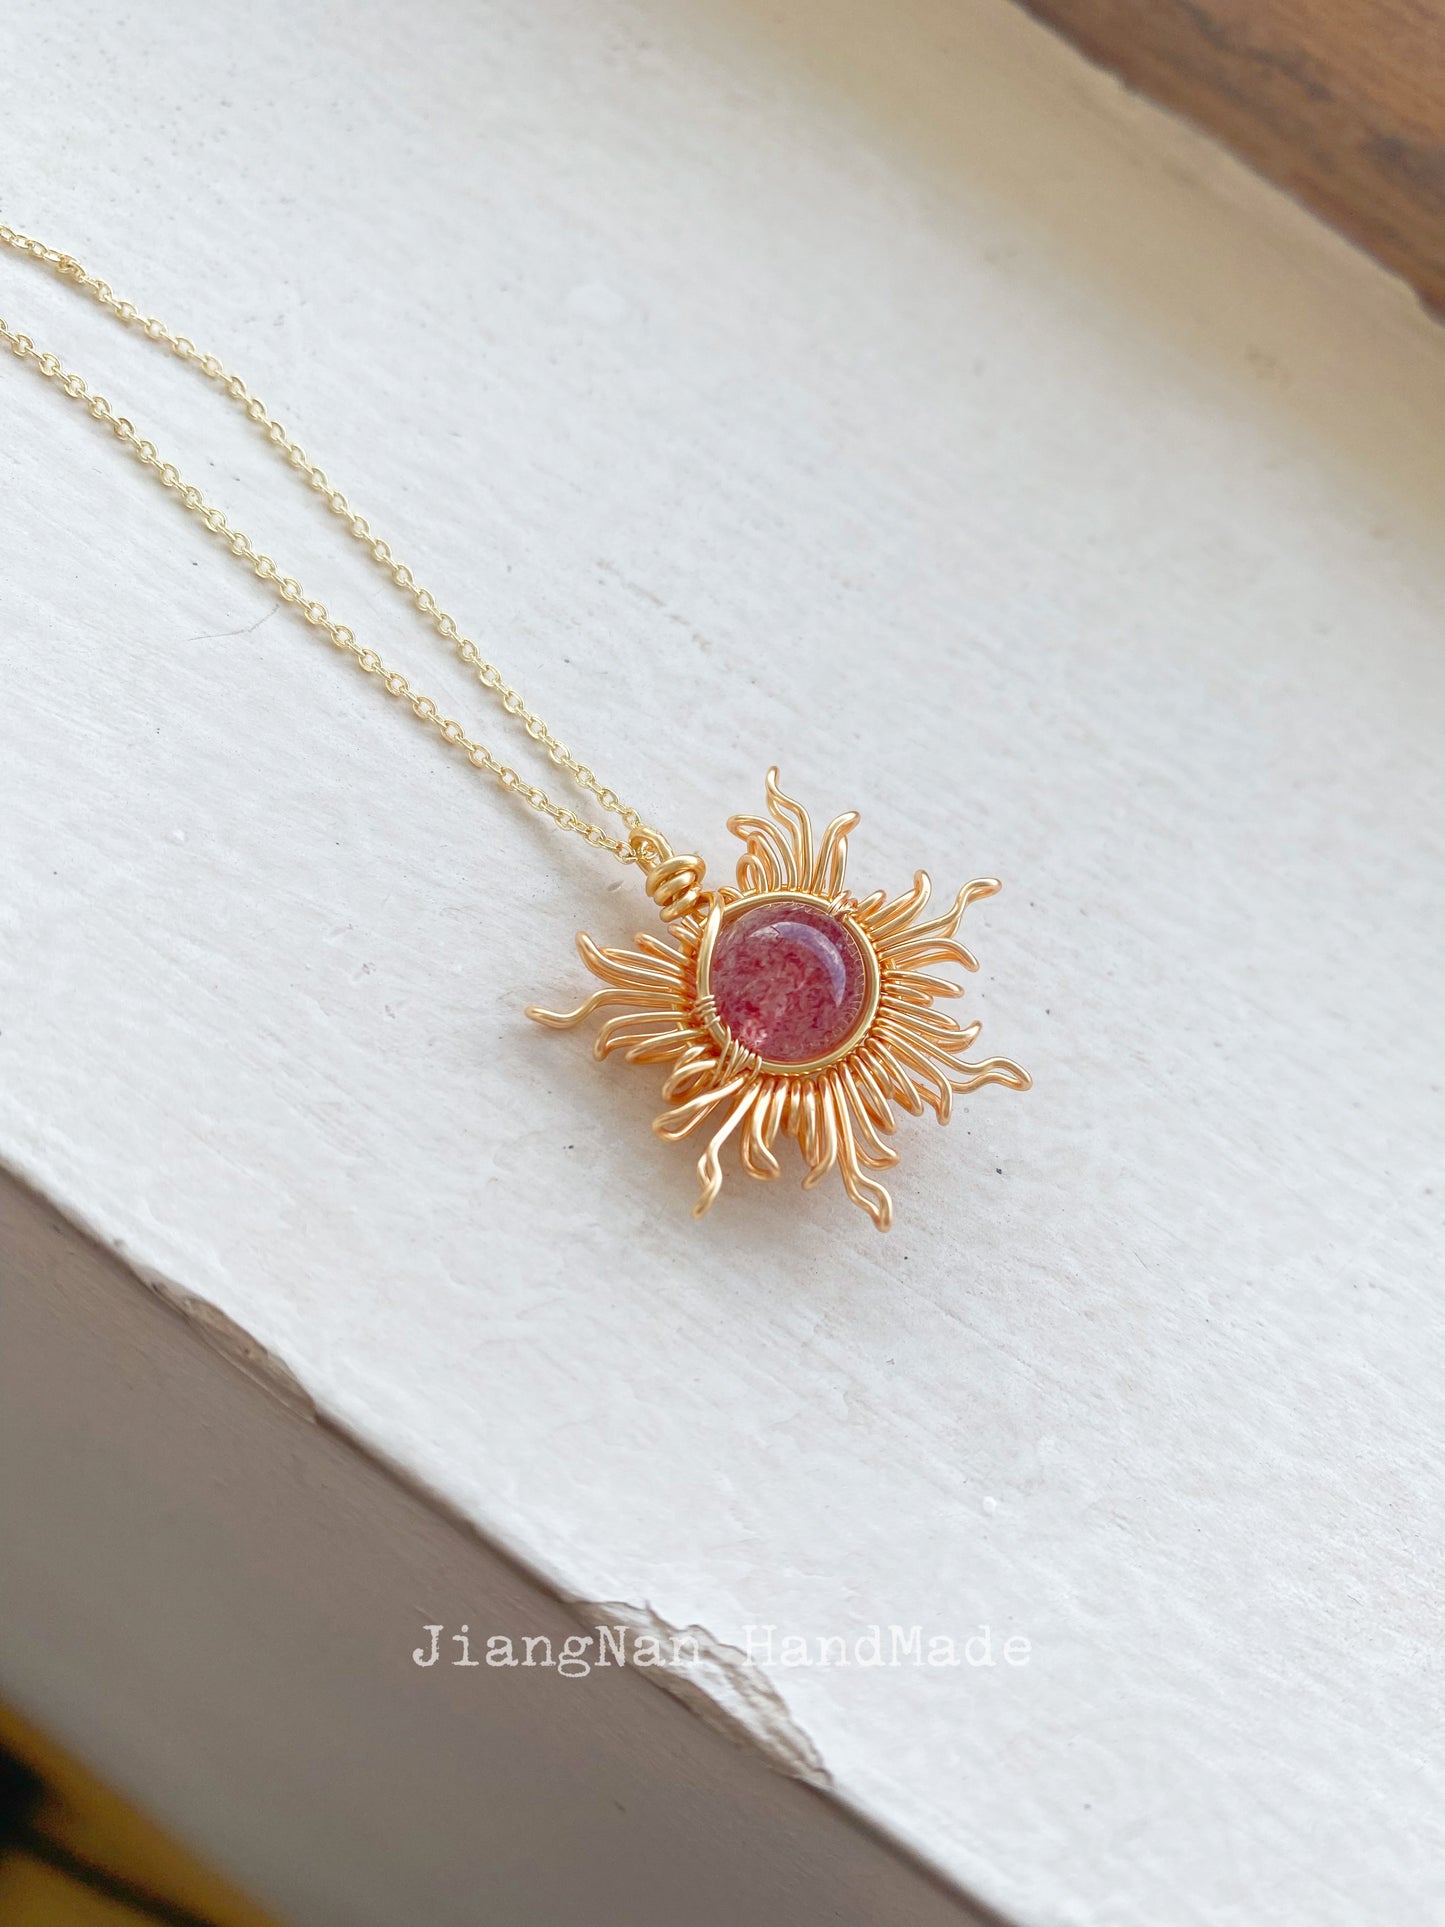 Handmade Magic Sun Necklace -  Wire Wrapped Jewelry